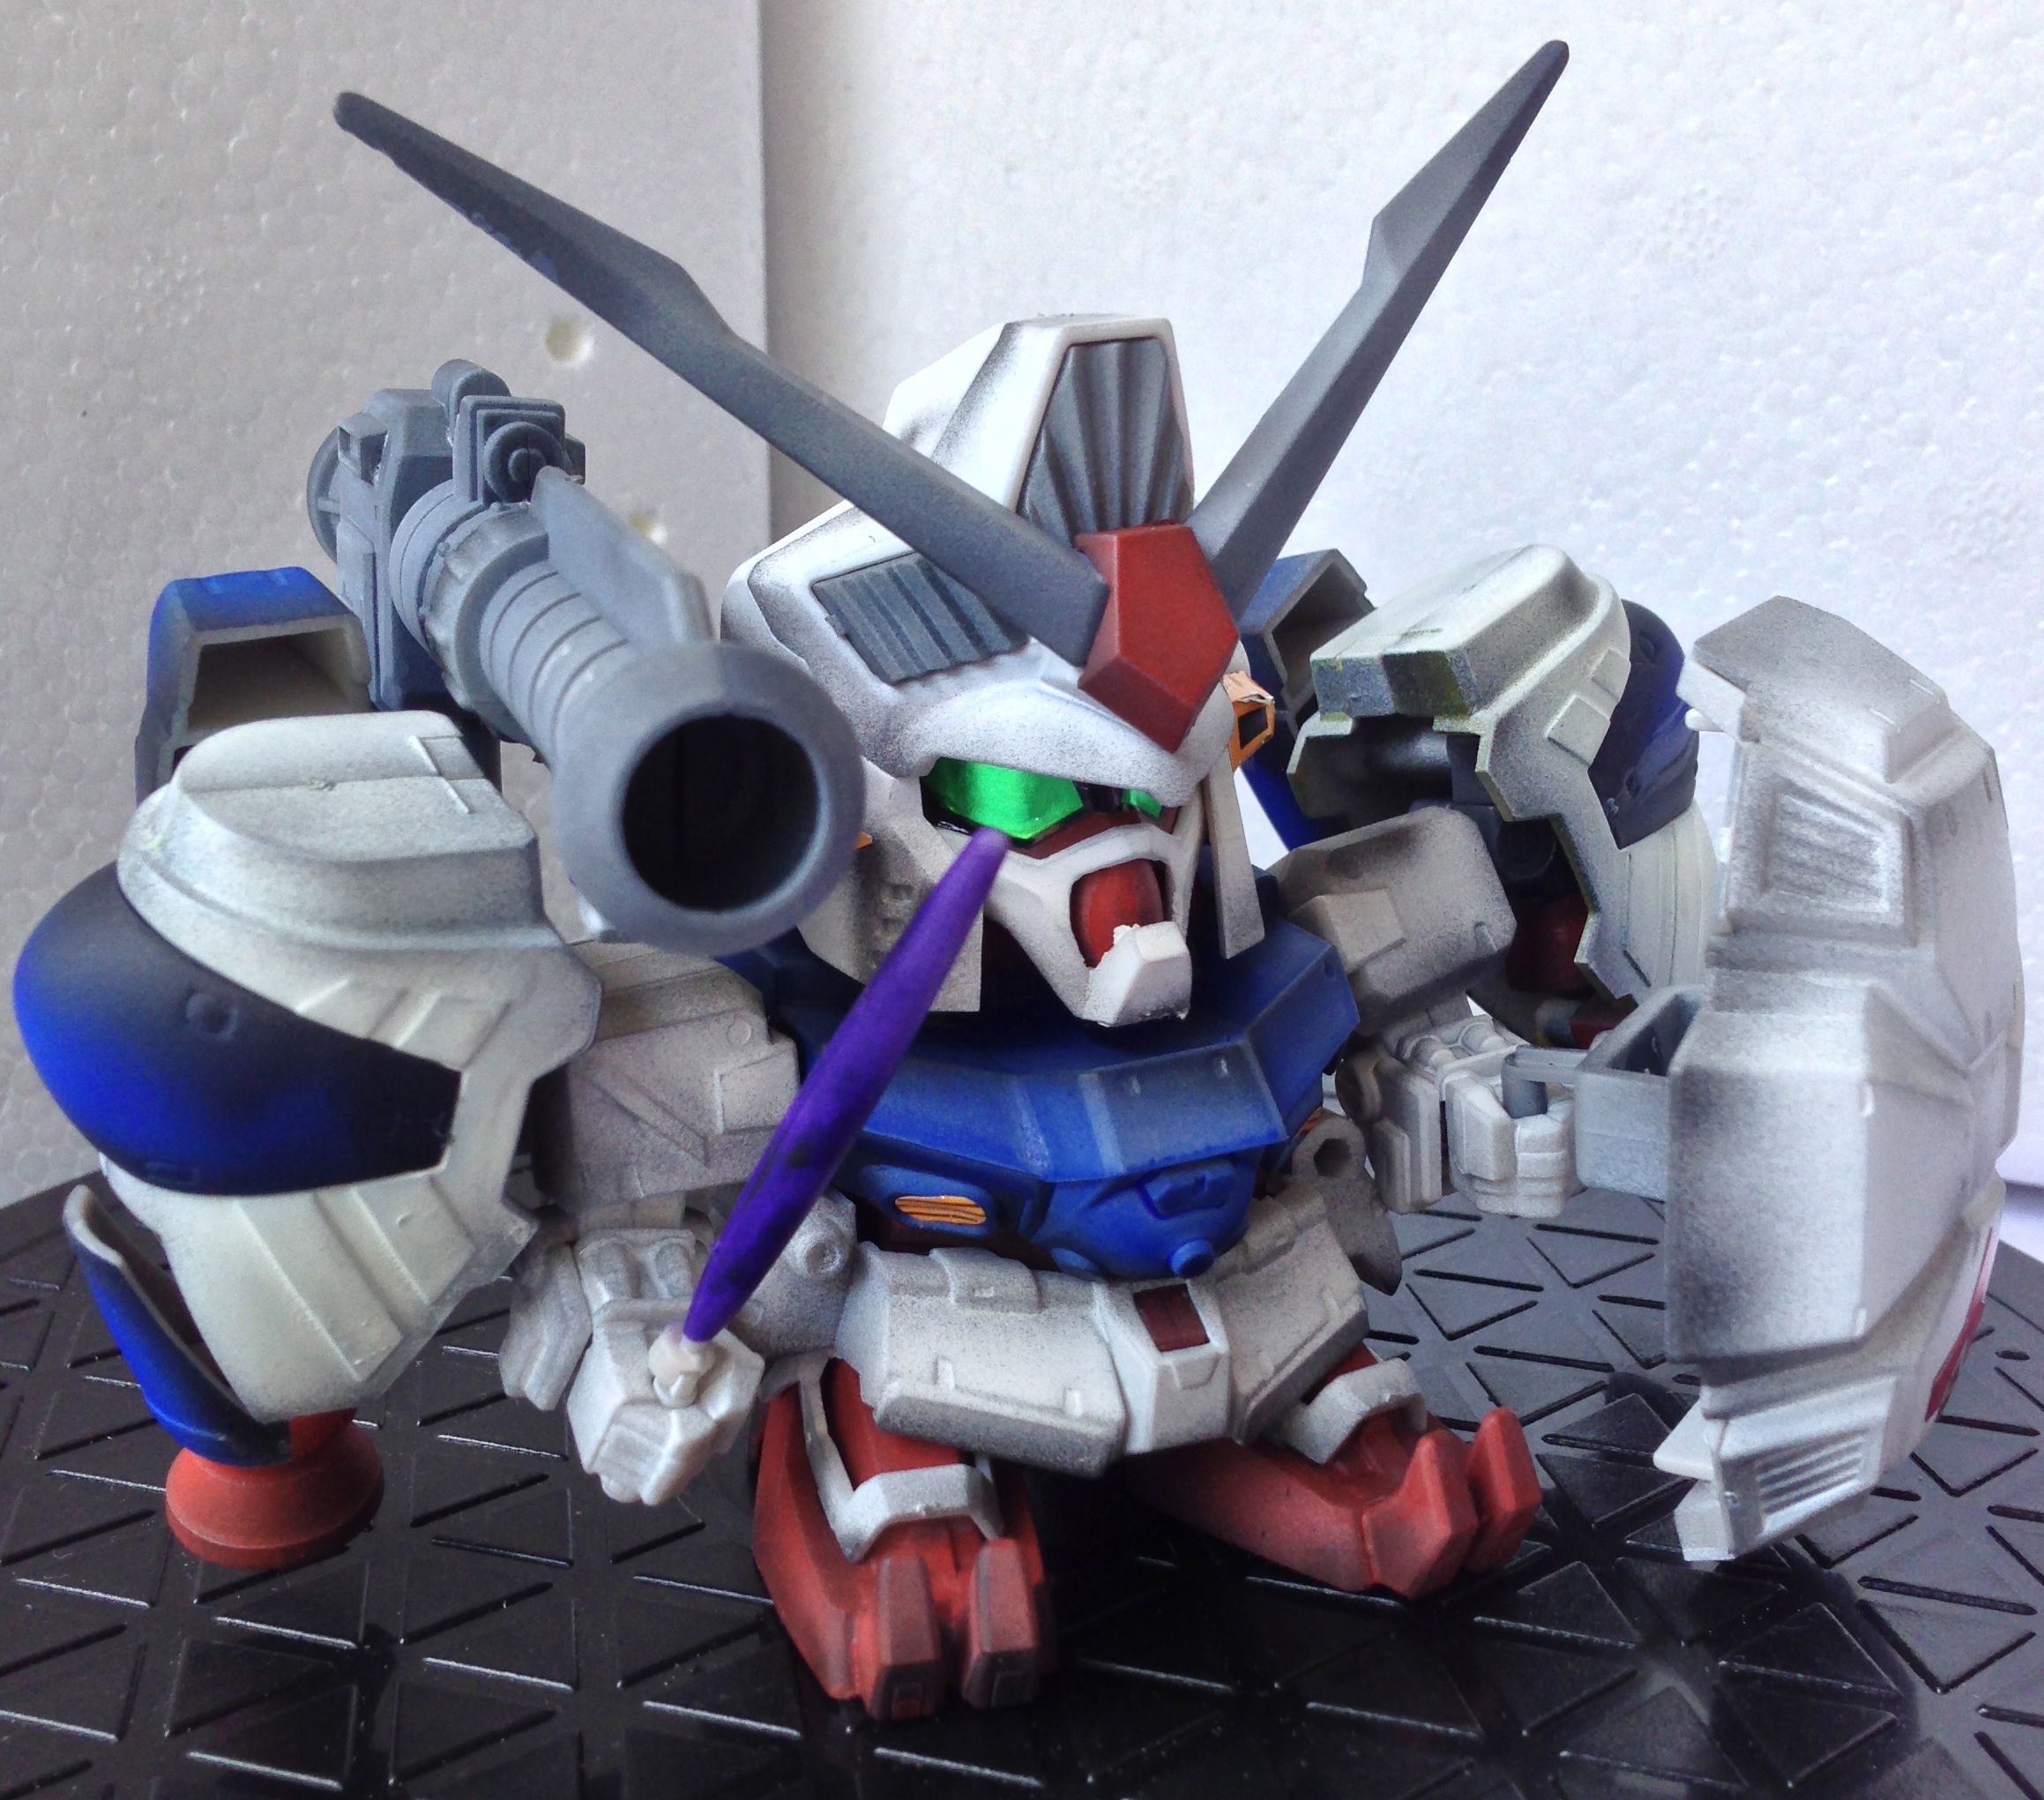 cs-model-gundam-gs-gp02a-deformed-painted-with-airbrush-5